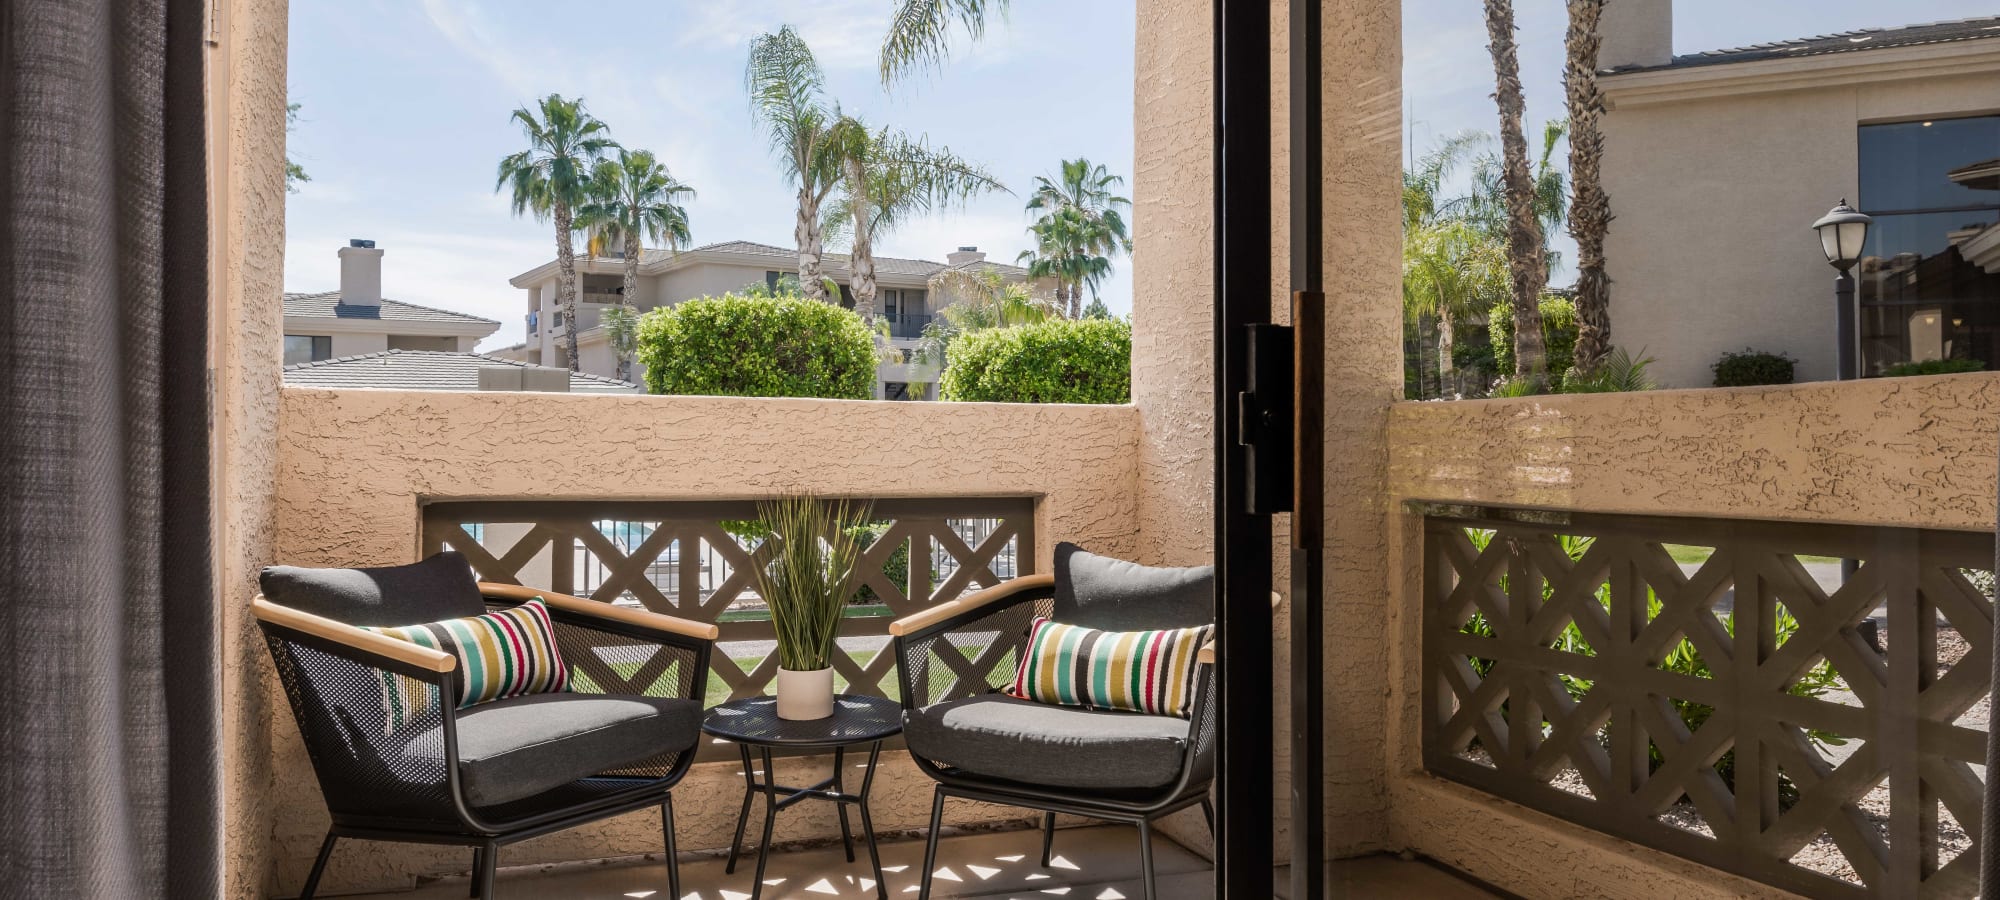 Private patio with some cute chairs to relax on and enjoy the nice view at Elite North Scottsdale in Scottsdale, Arizona